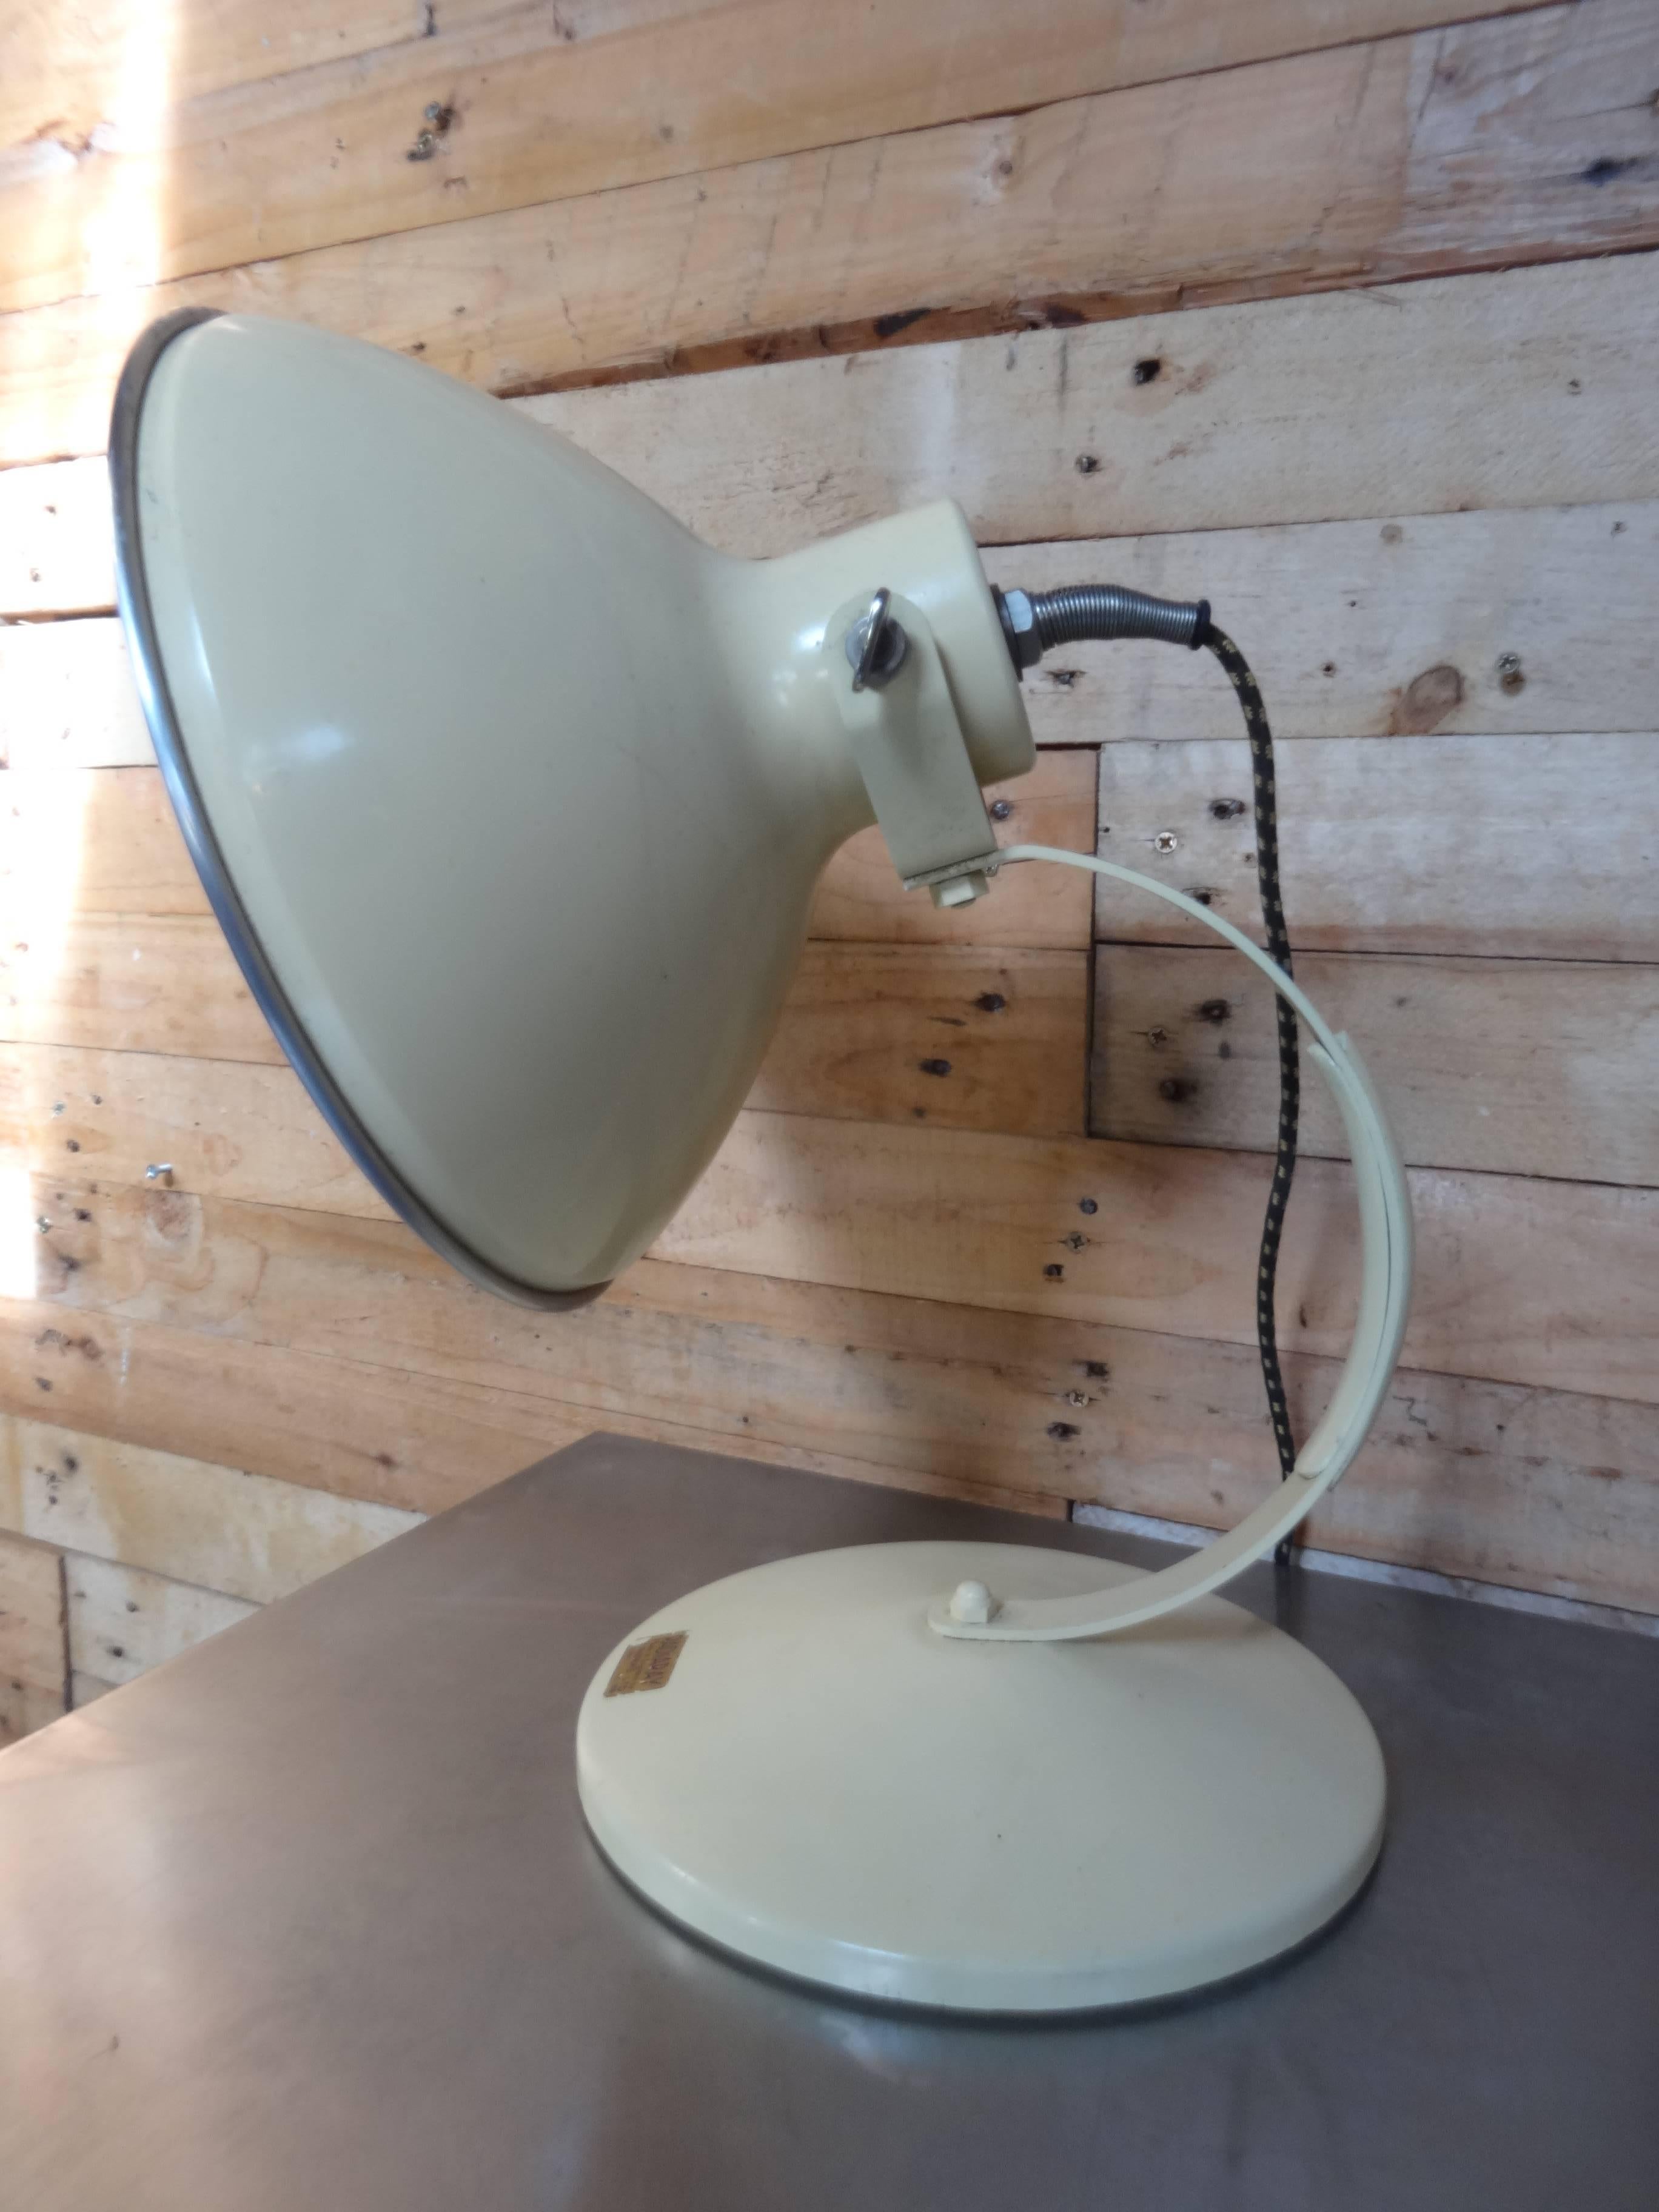 1950 retro vintage English hospital table or desk light, fully working, has has no electric plug (needs fitting!)

Dimensions (approx.): Height 35 cm, depth 35cm, width 27cm.
 